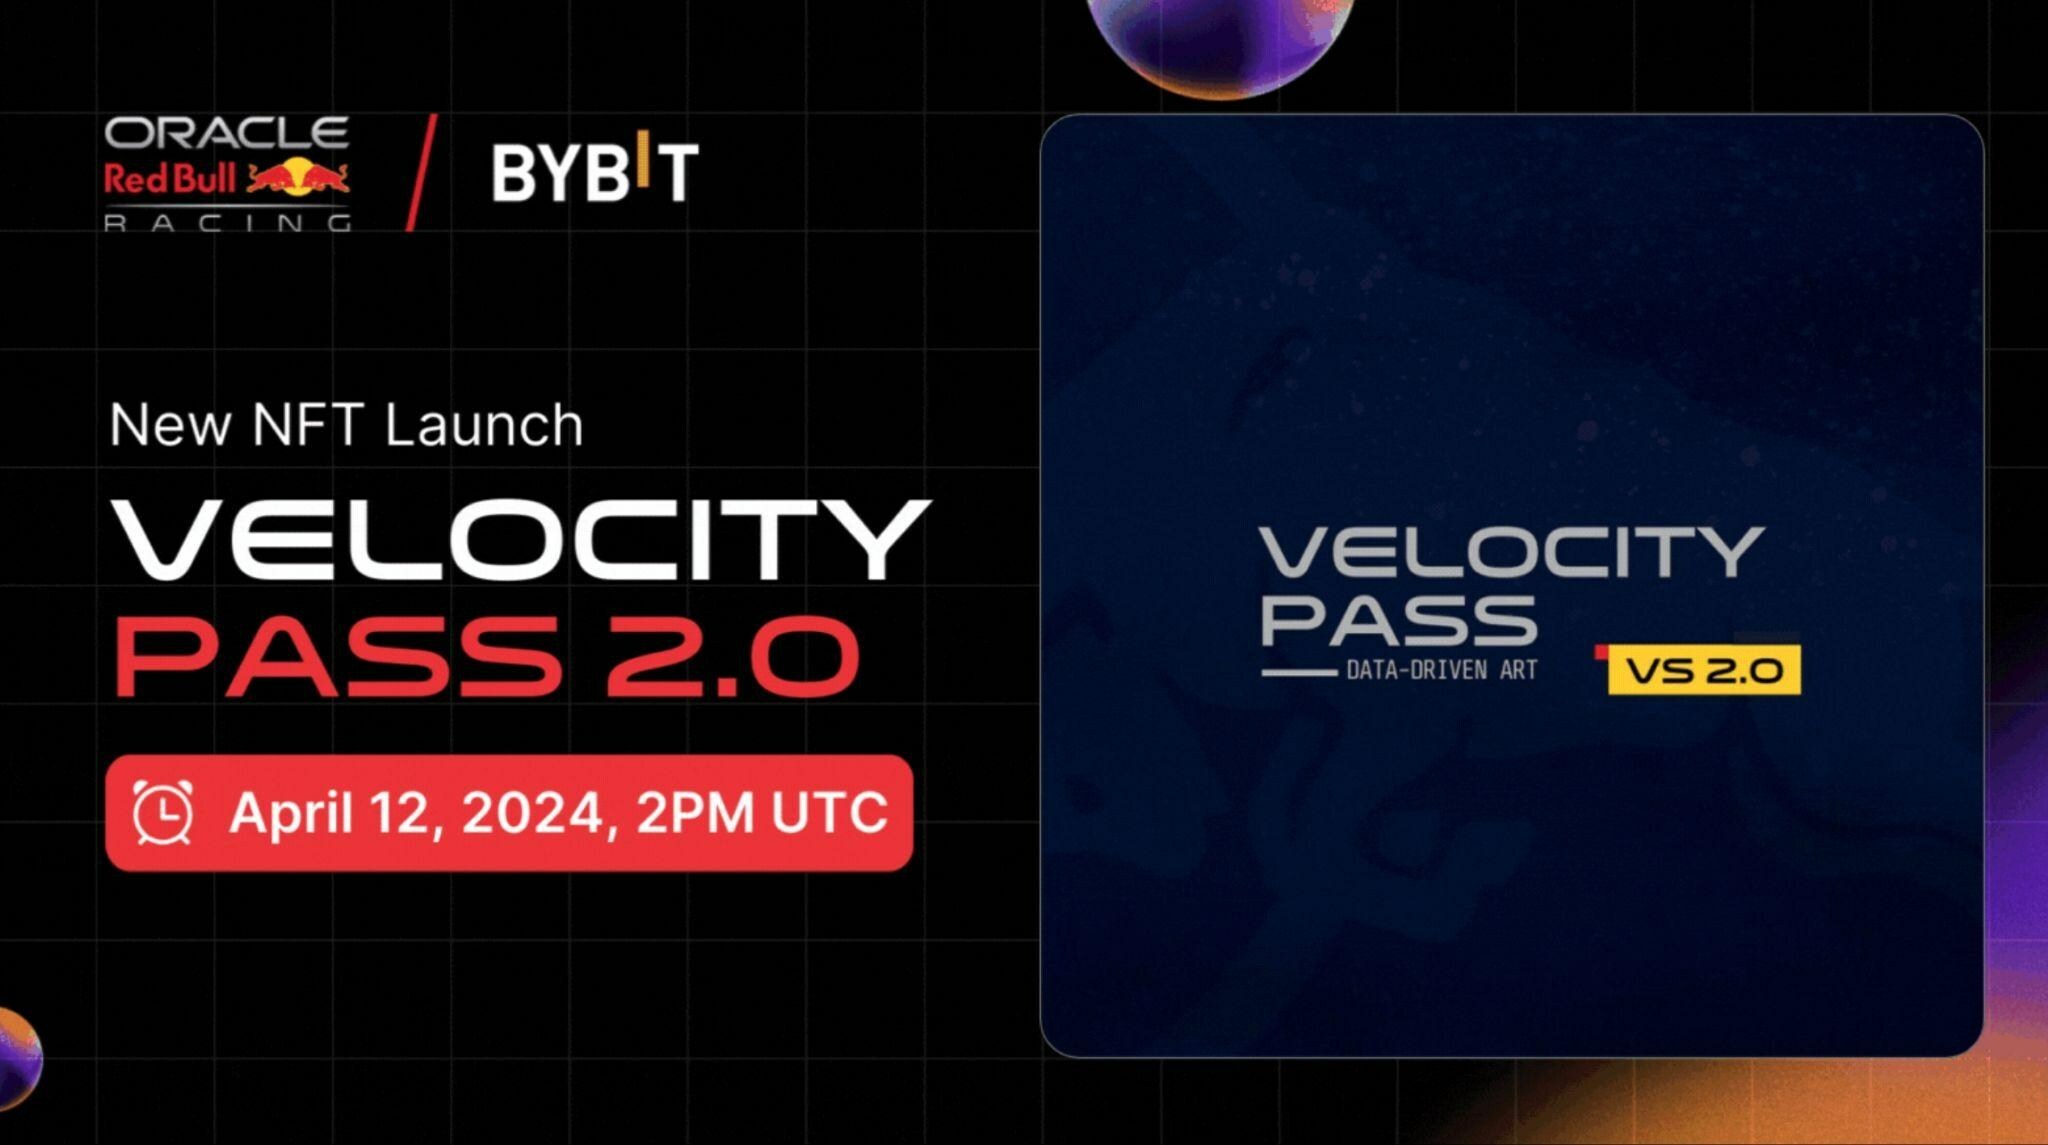 Bybit and Oracle Red Bull Racing Ignite Excitement with Velocity Series 2.0: Unveiling Innovative Divisible, Data-Driven Art NFTs